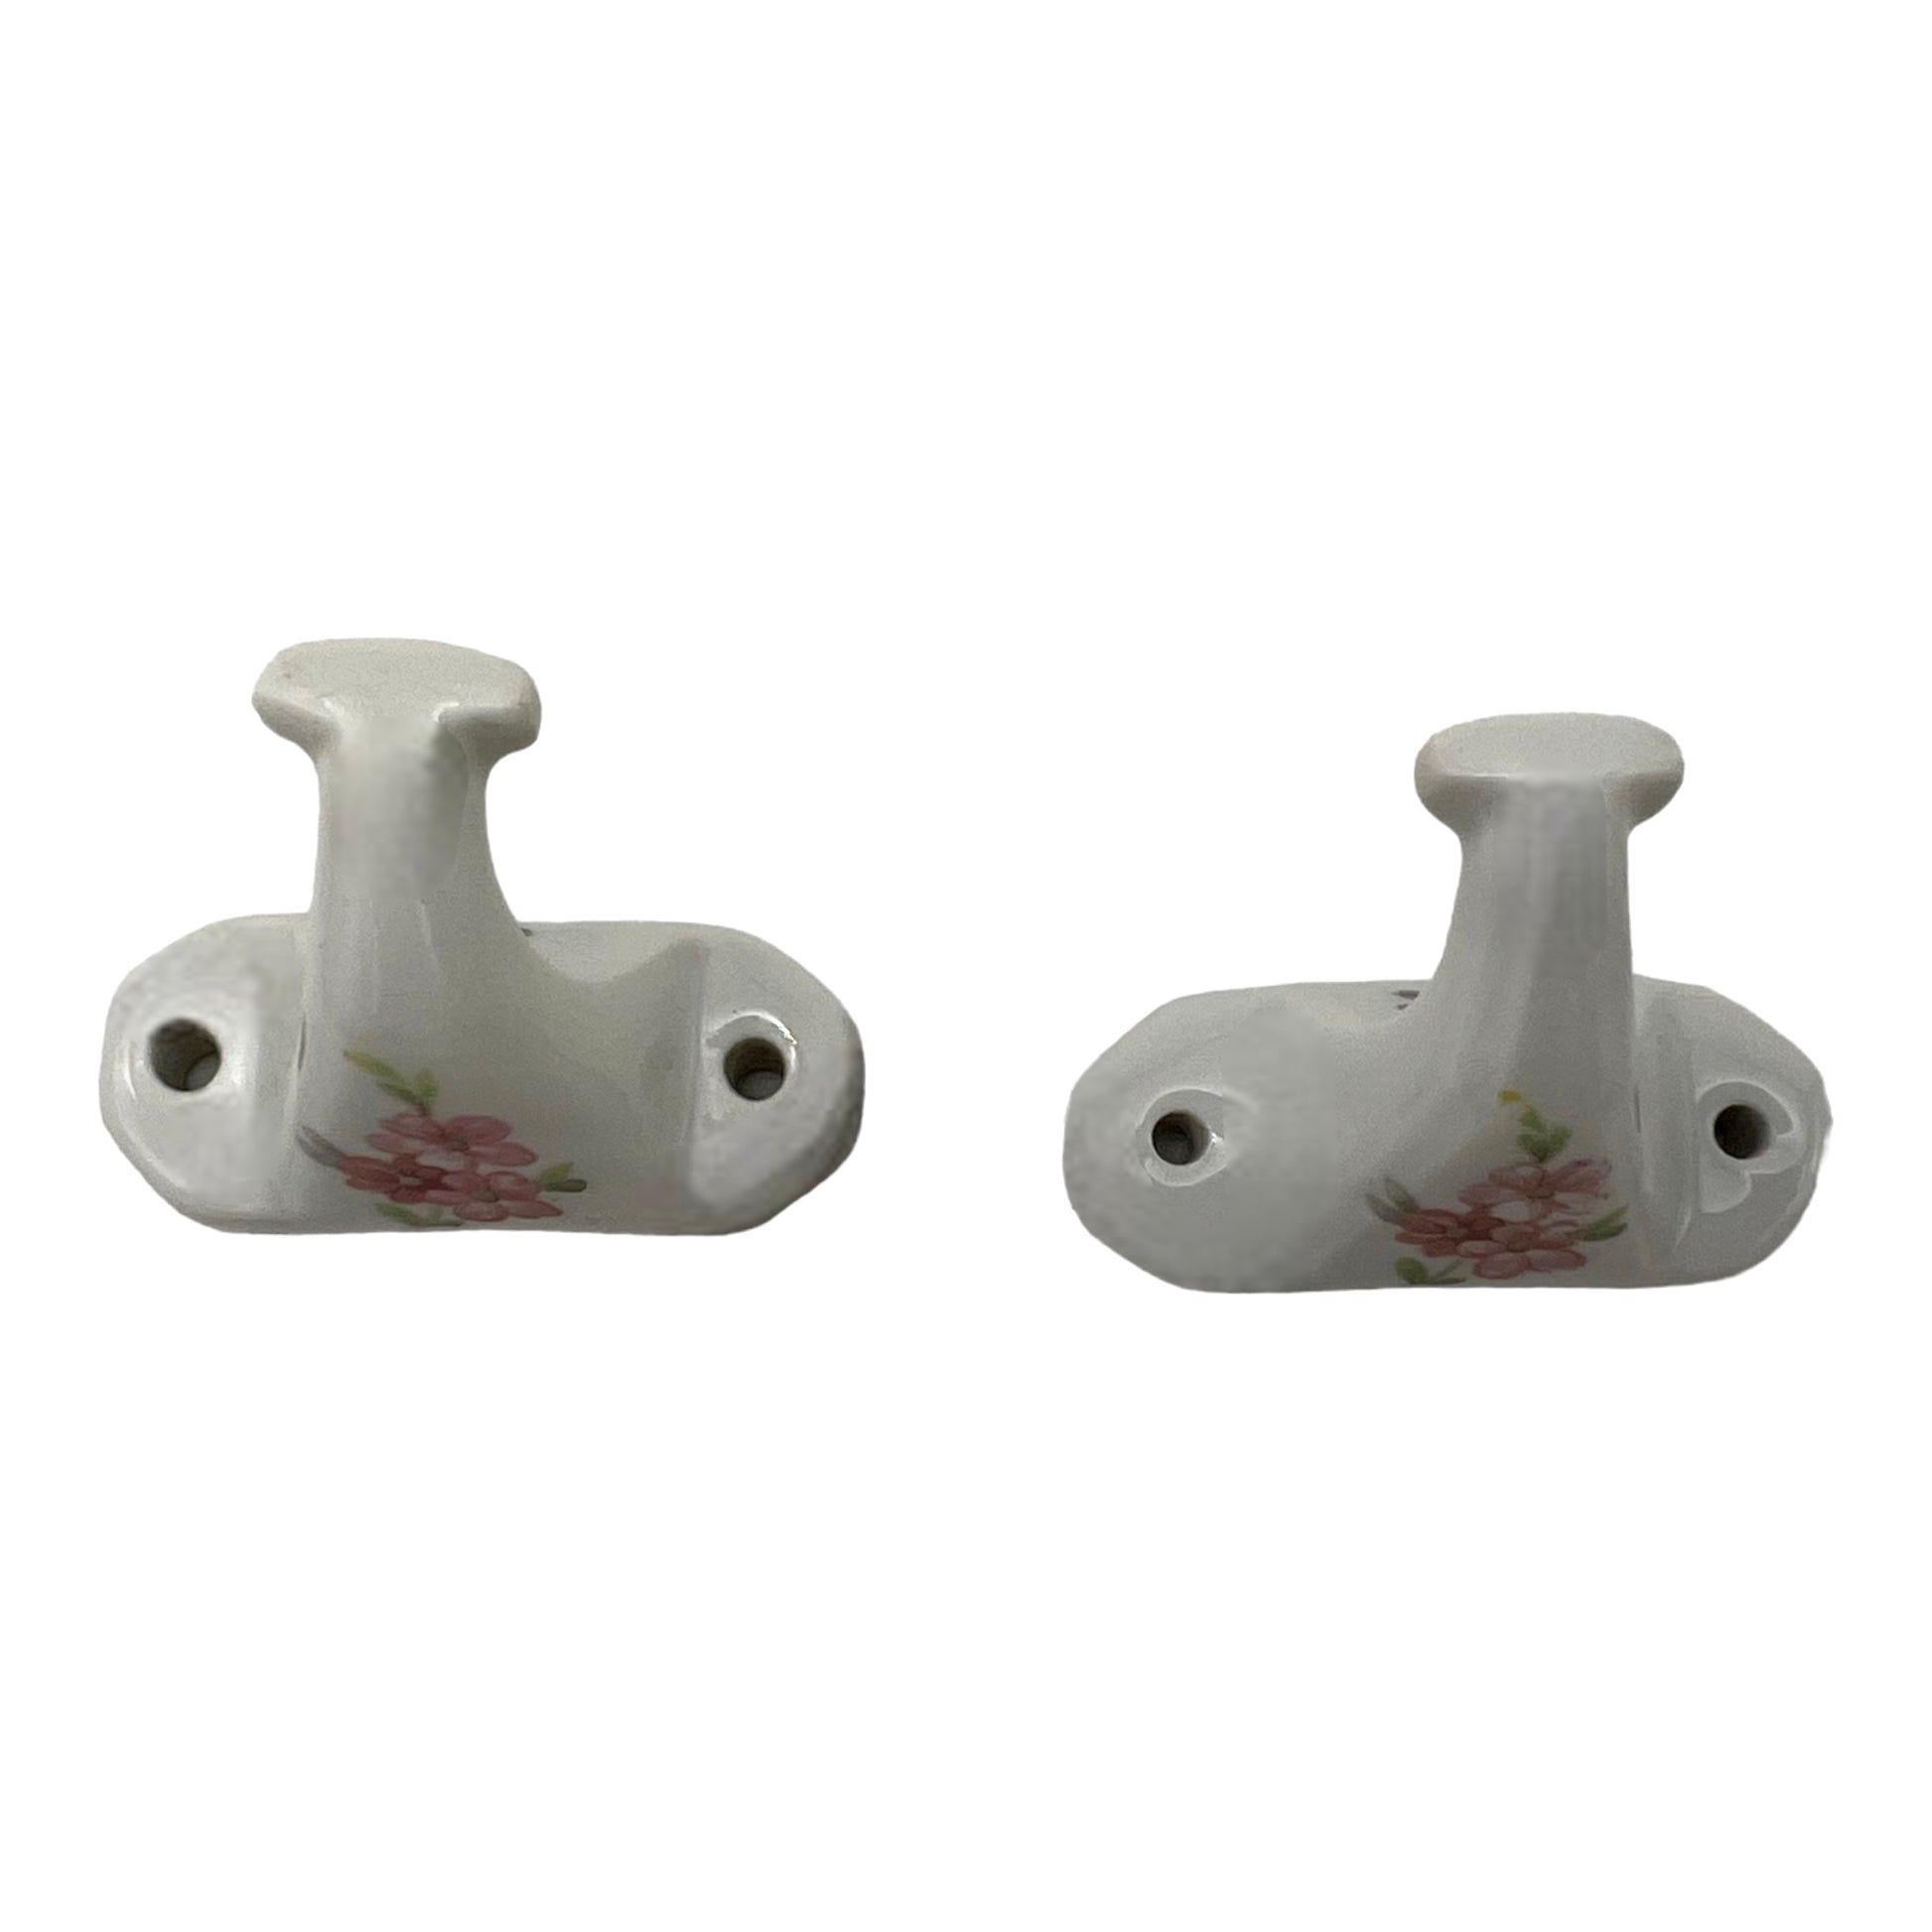 image collection of 14 French porcelain hooks ideal for a bathroom or kitchen